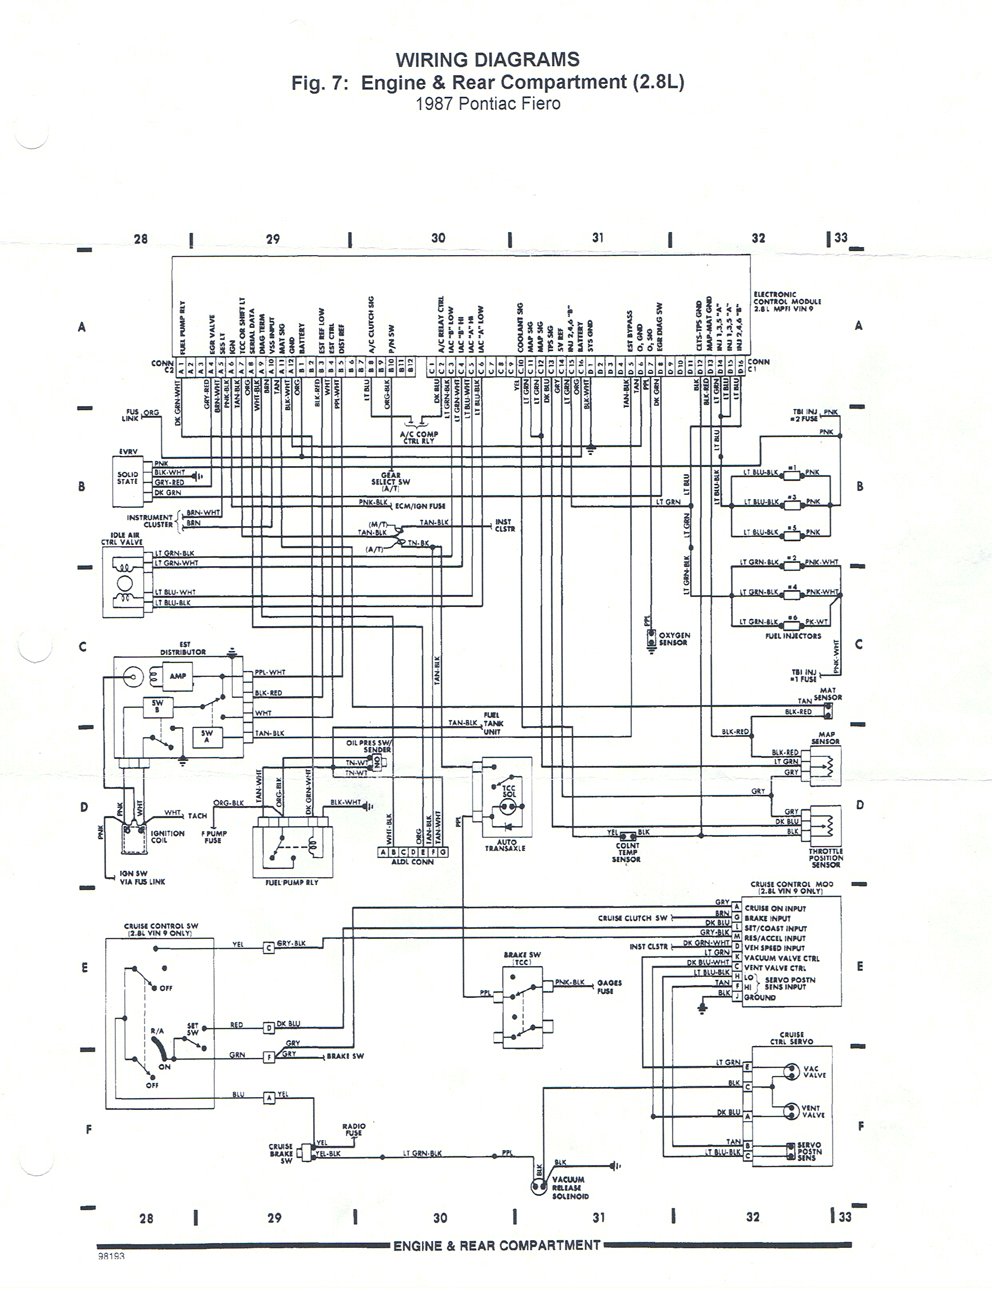 Diagram Of The Wiring Harness, Fiero 3800 Wiring Diagram